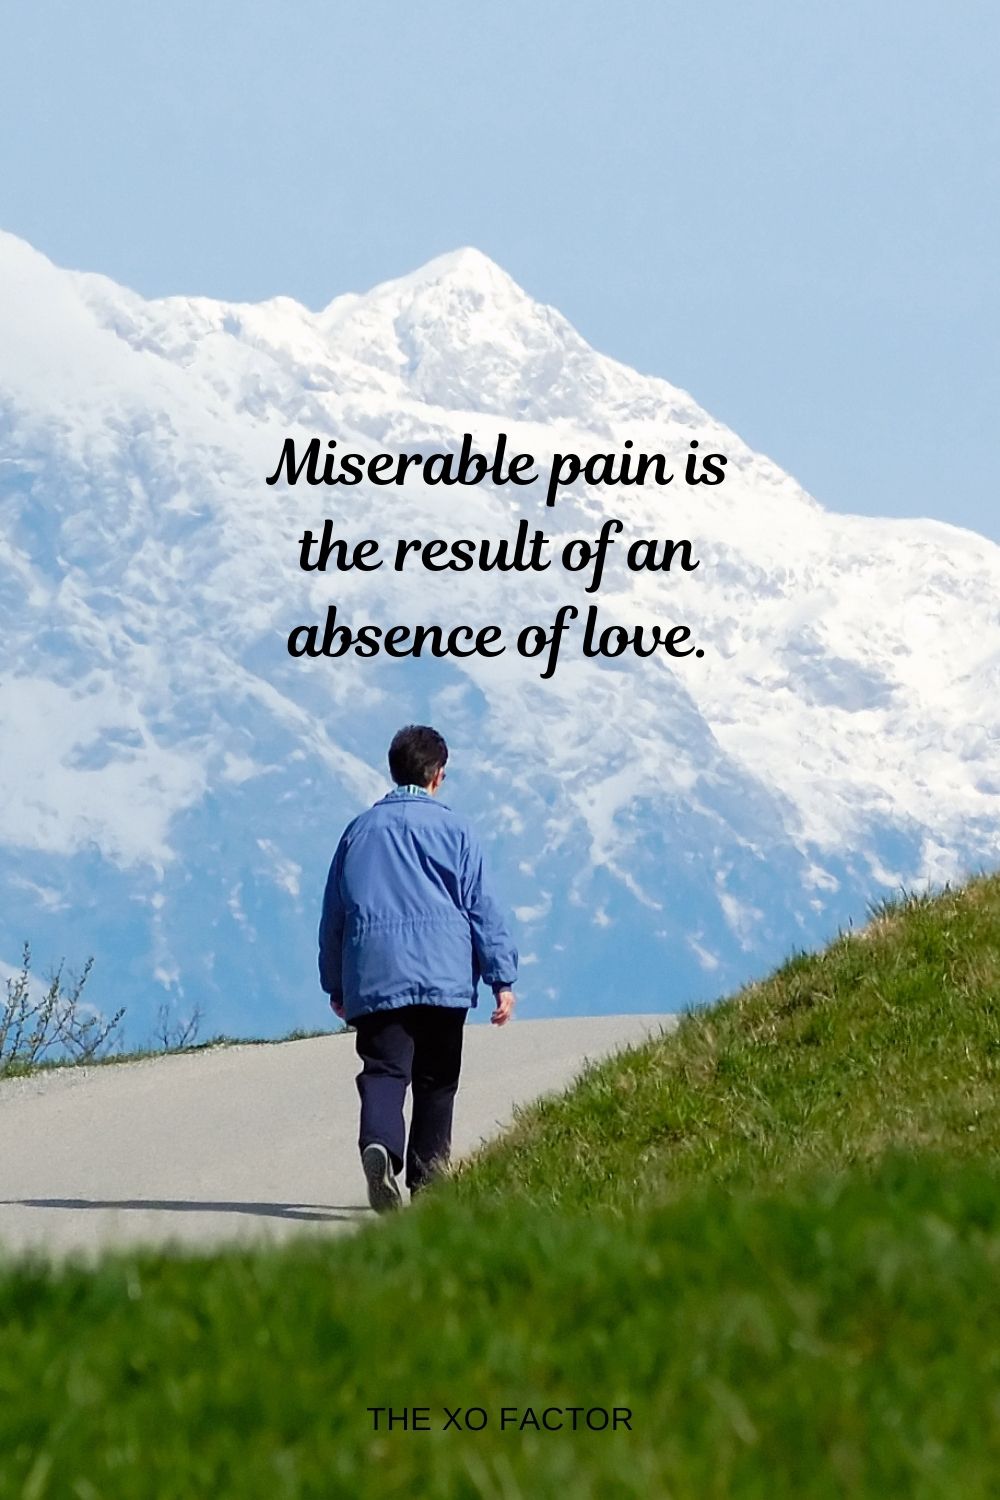 Miserable pain is the result of an absence of love.